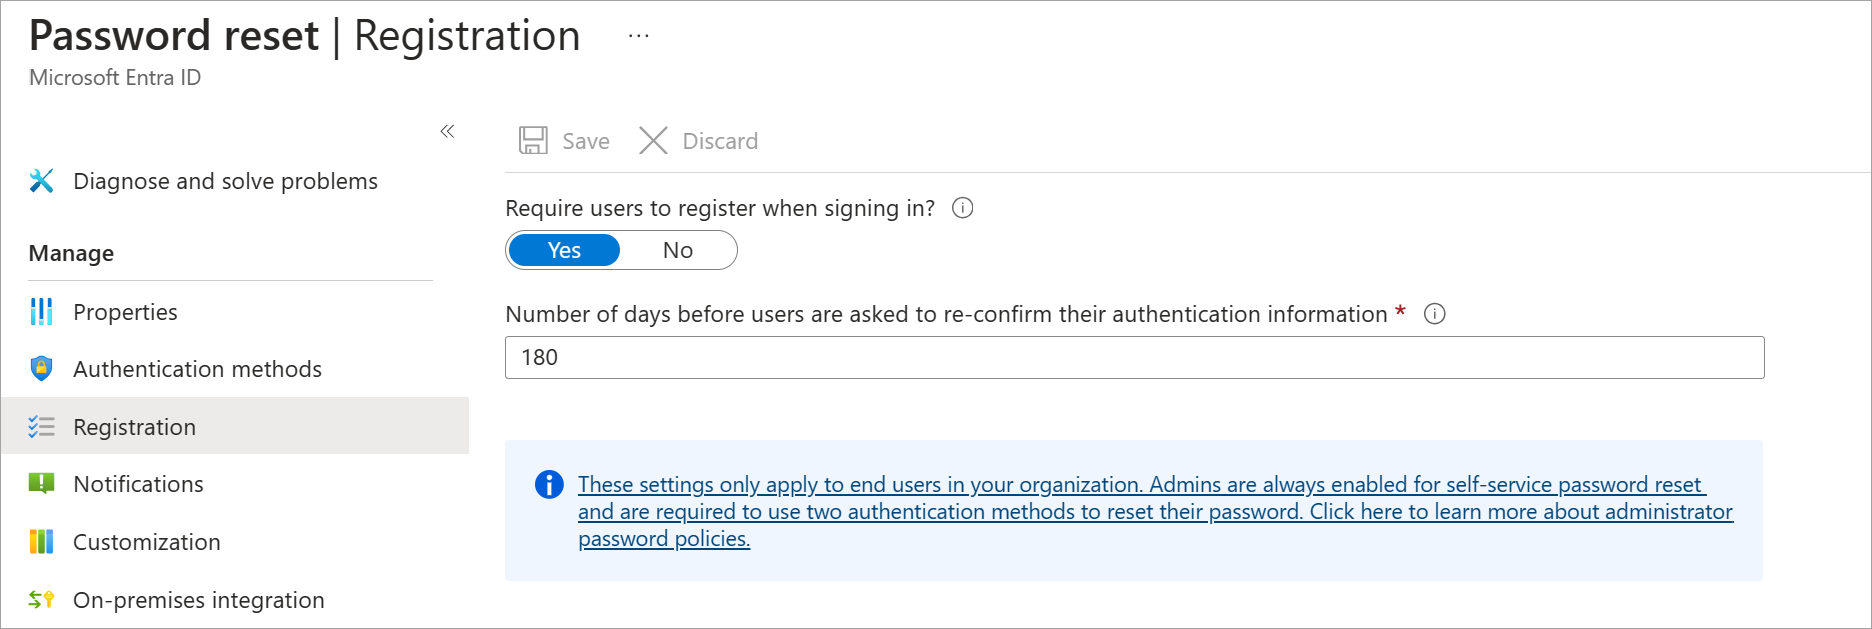 Screenshot of the Password Reset panel's Registration option selected displaying panel with registration options.